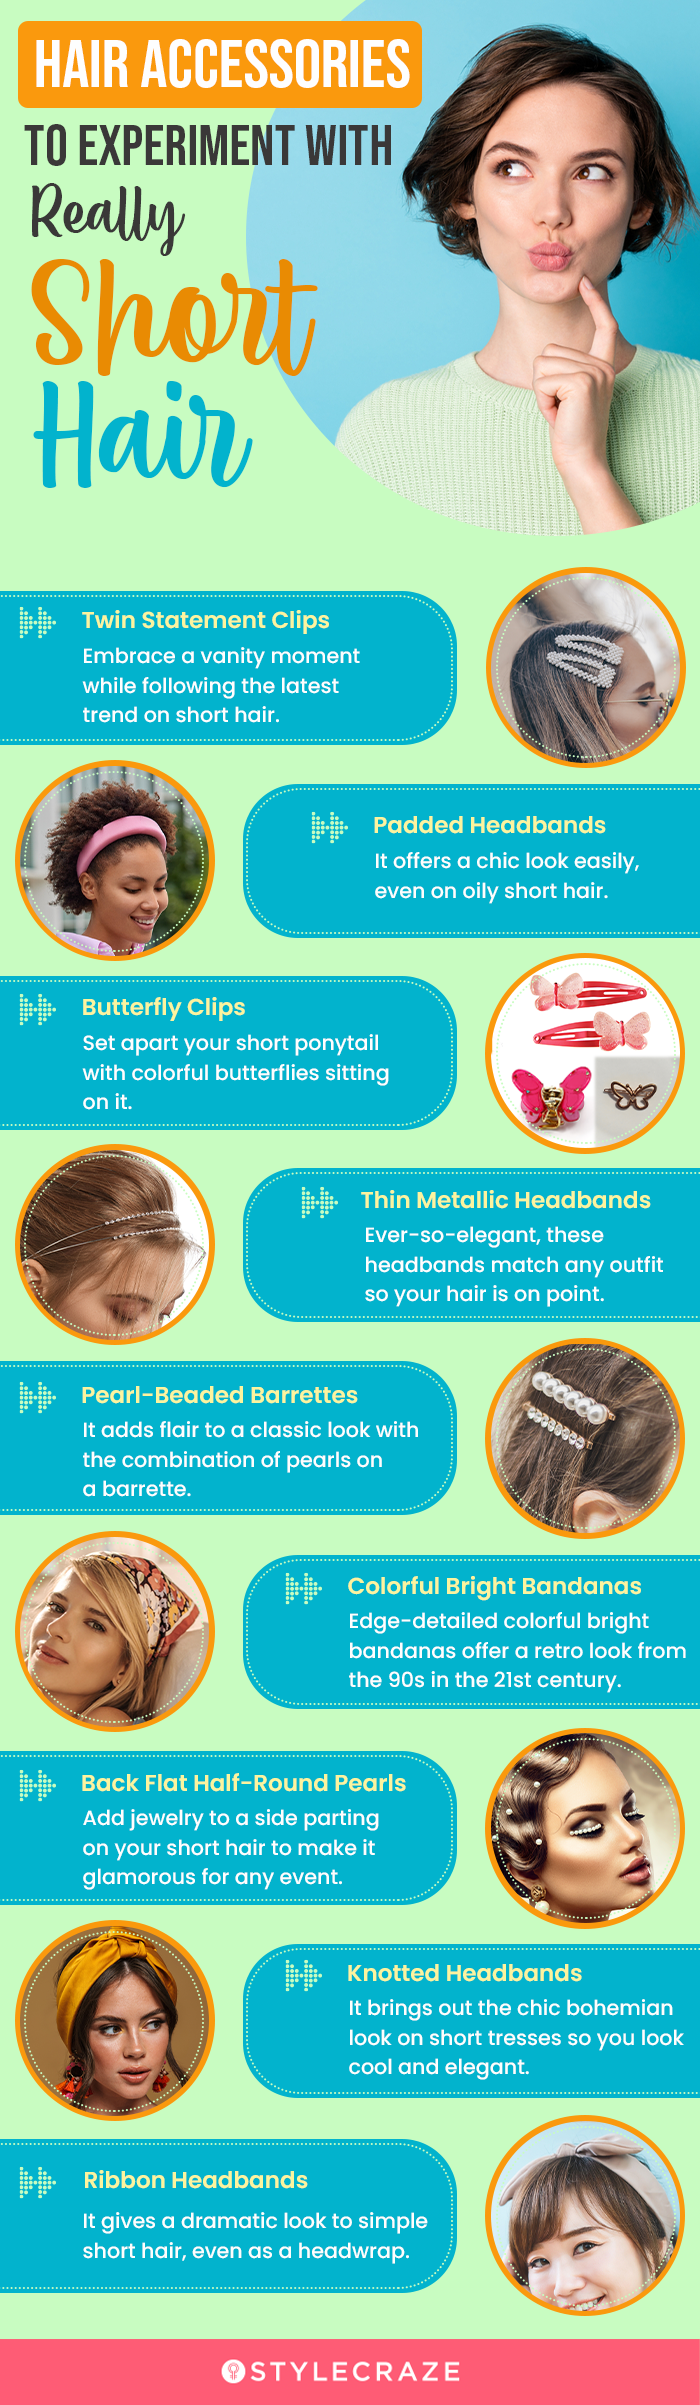 hair accessories to experiment with really short hair [infographic]